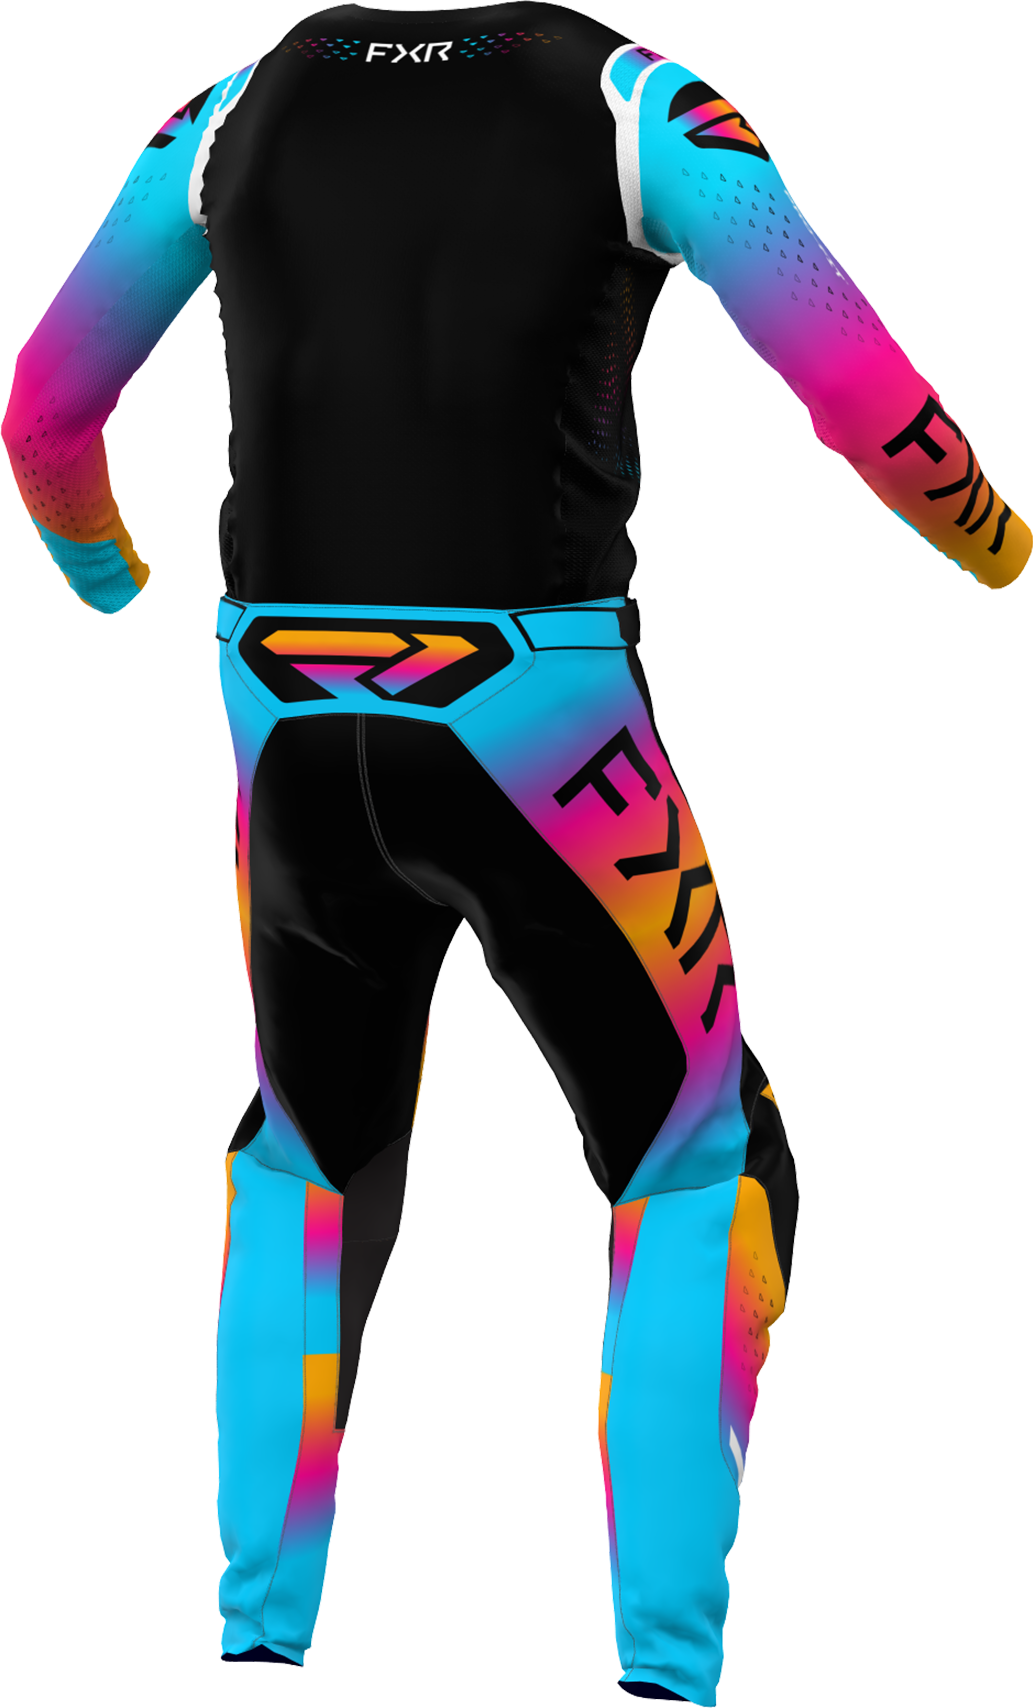 A 3D image of FXR's Helium MX Jersey and Pant in Chromatic colorway